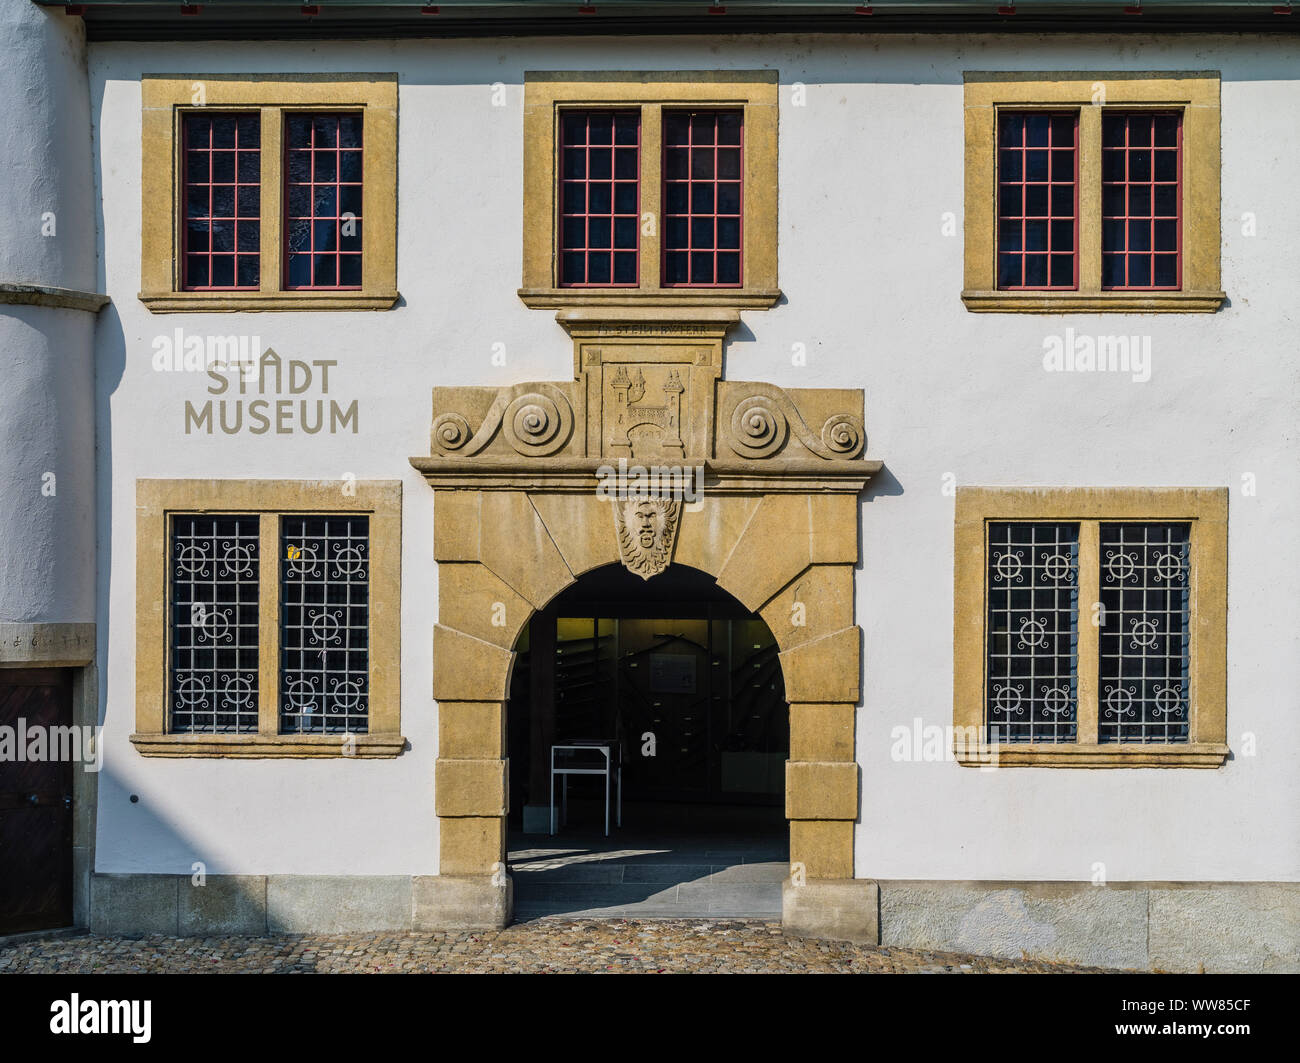 Historical old town of Brugg in the Canton of Aargau, town museum Stock Photo